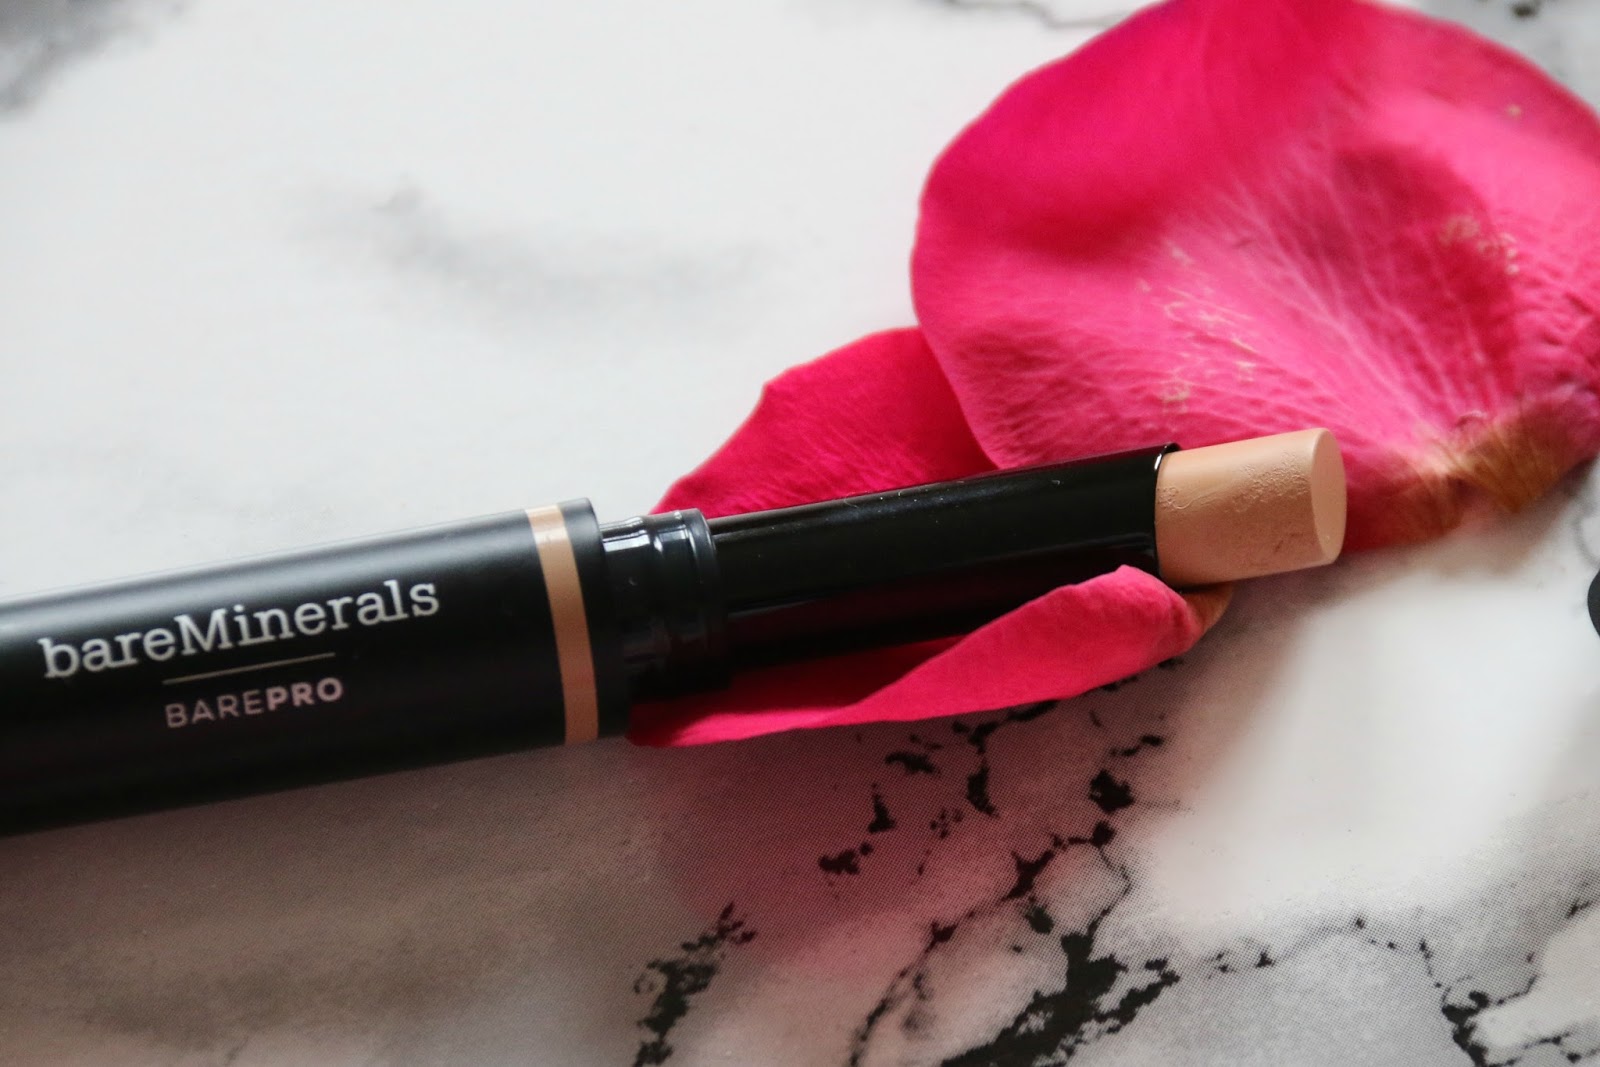 bareMinerals BAREPRO Concealer from World Duty Free Review